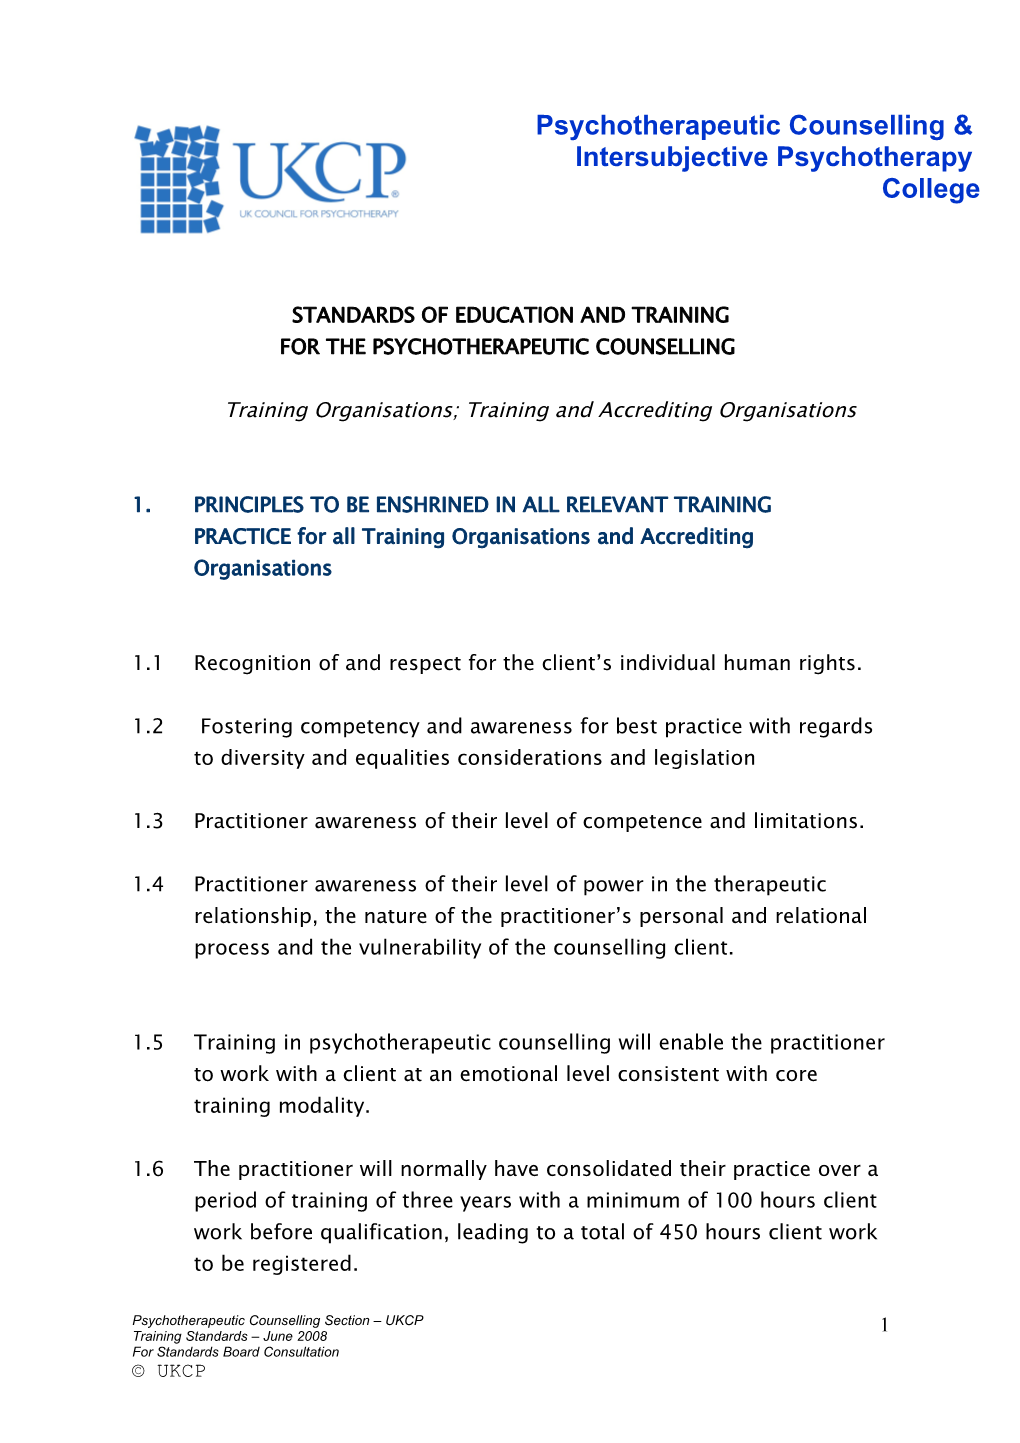 Standards of Education and Training